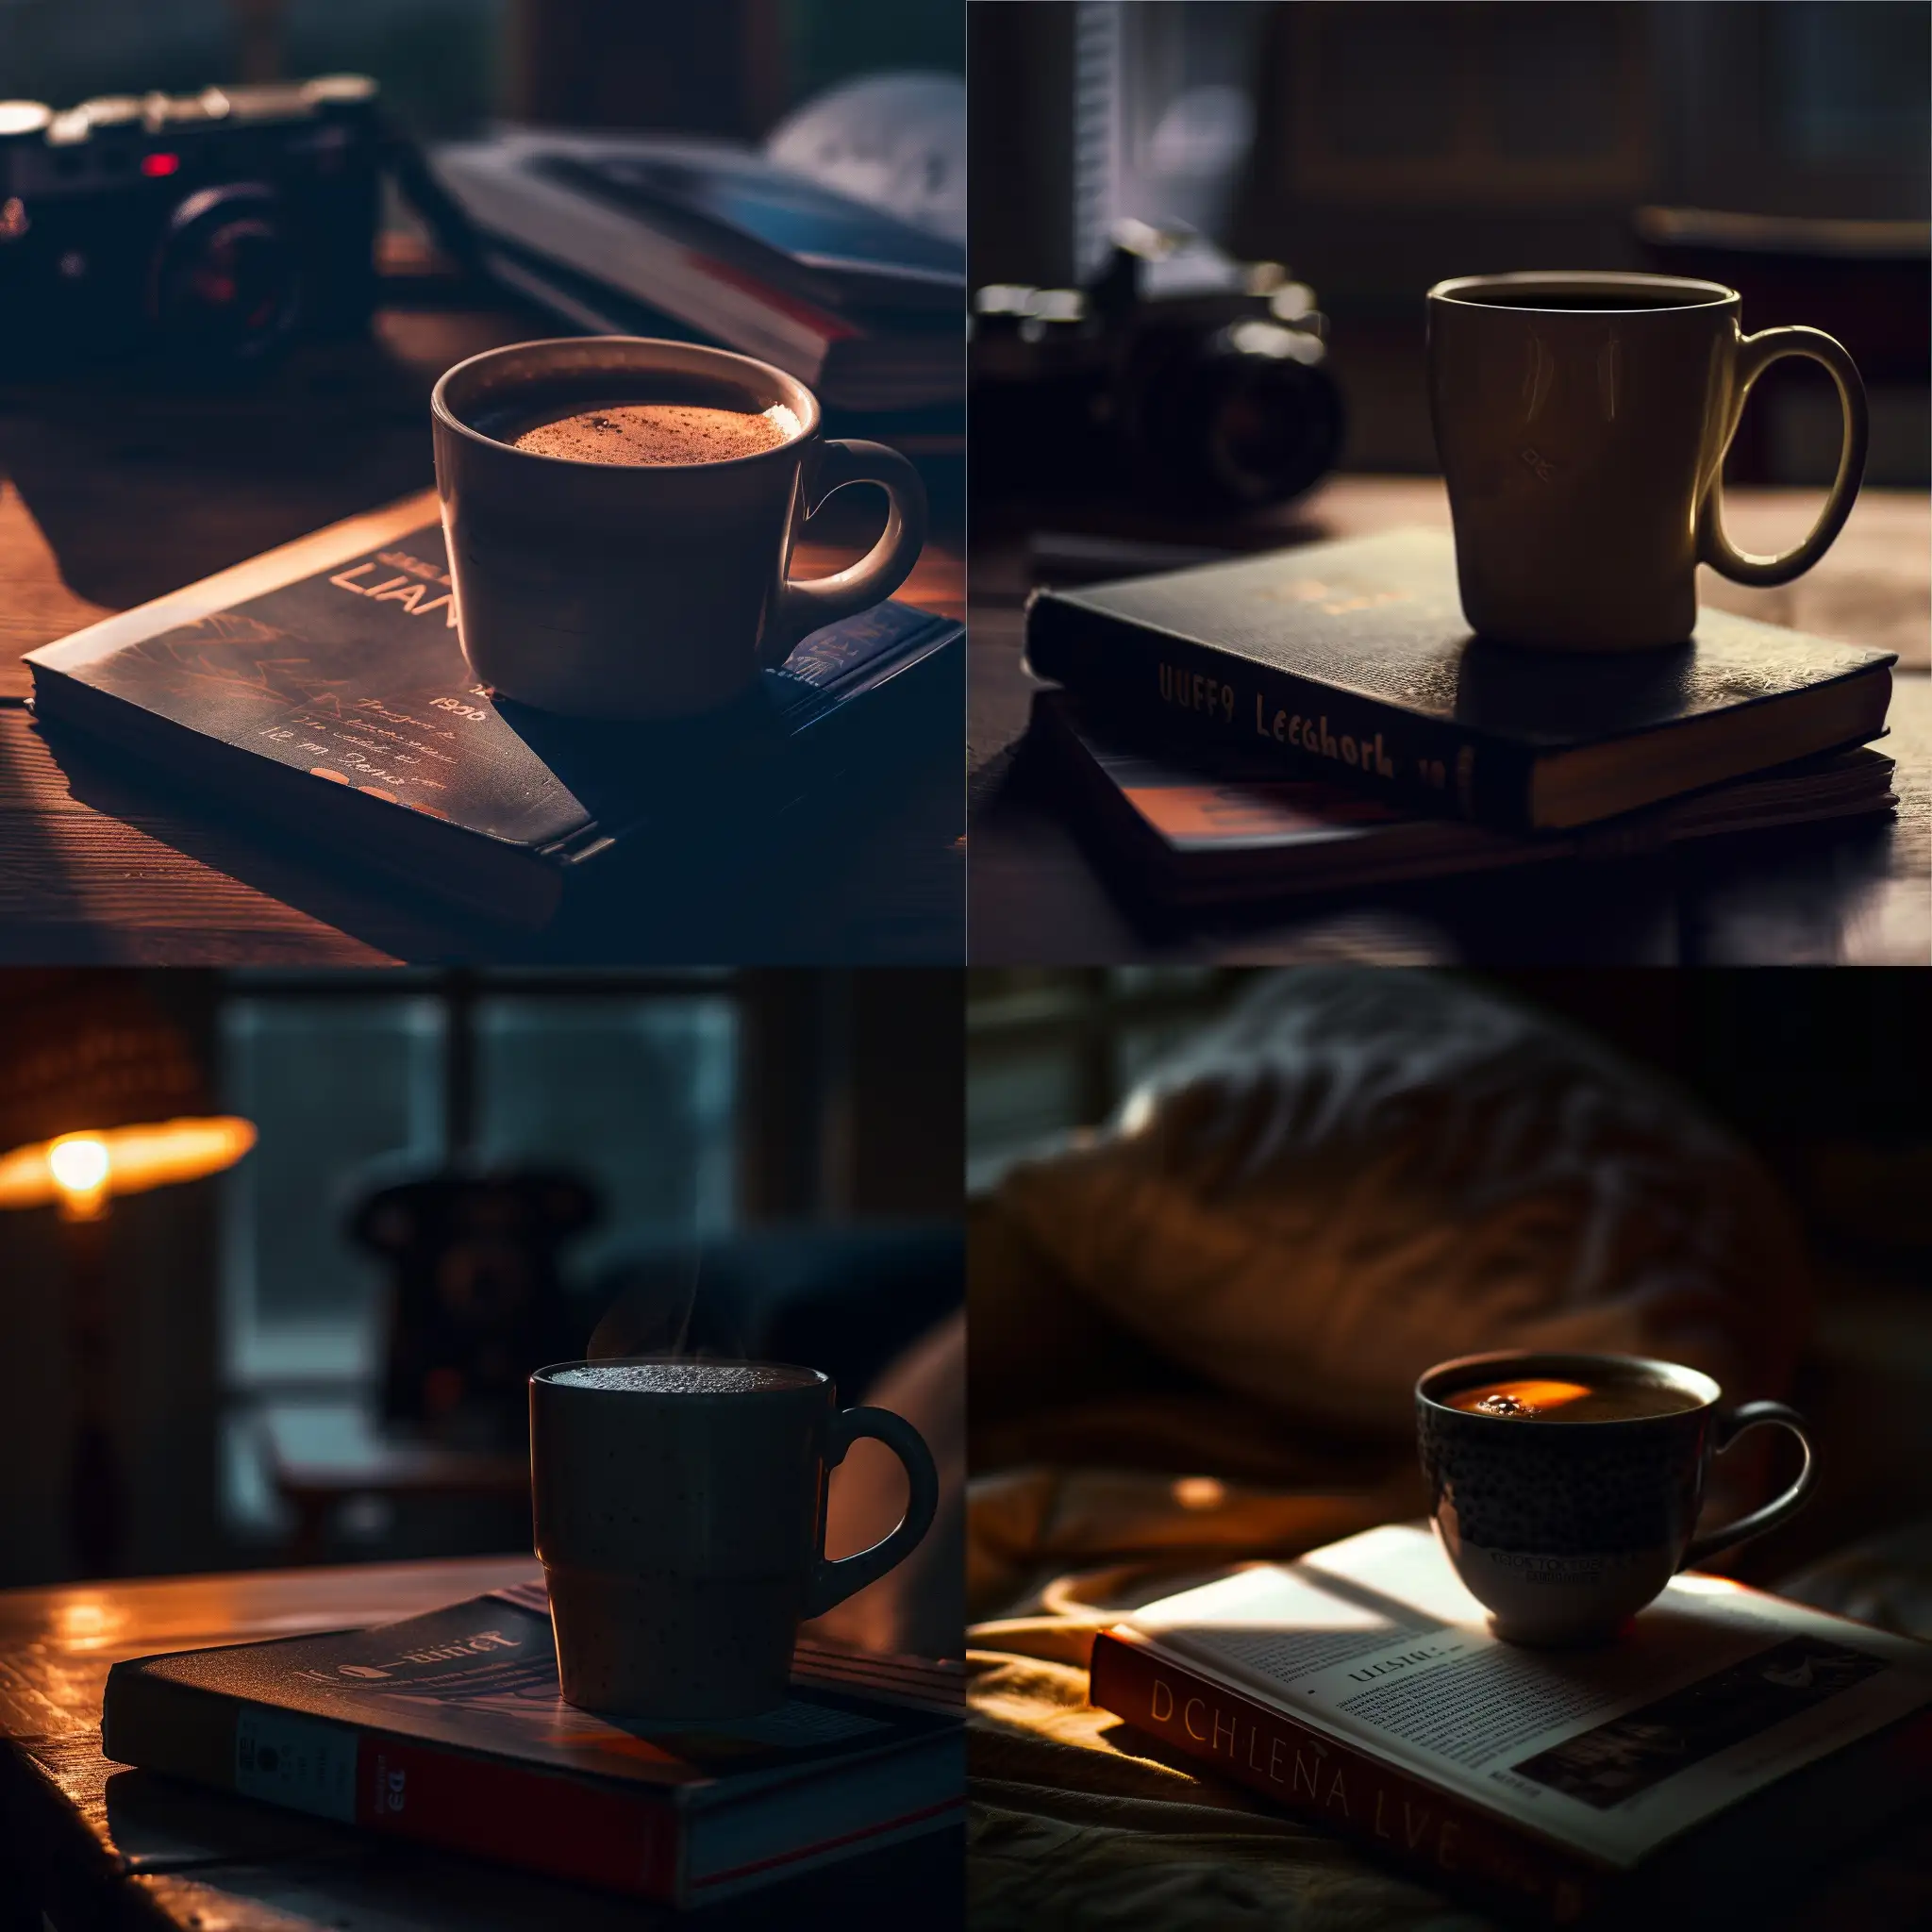 Luxury-Desktop-with-Coffee-Mug-and-Notebook-in-Evening-Ambiance